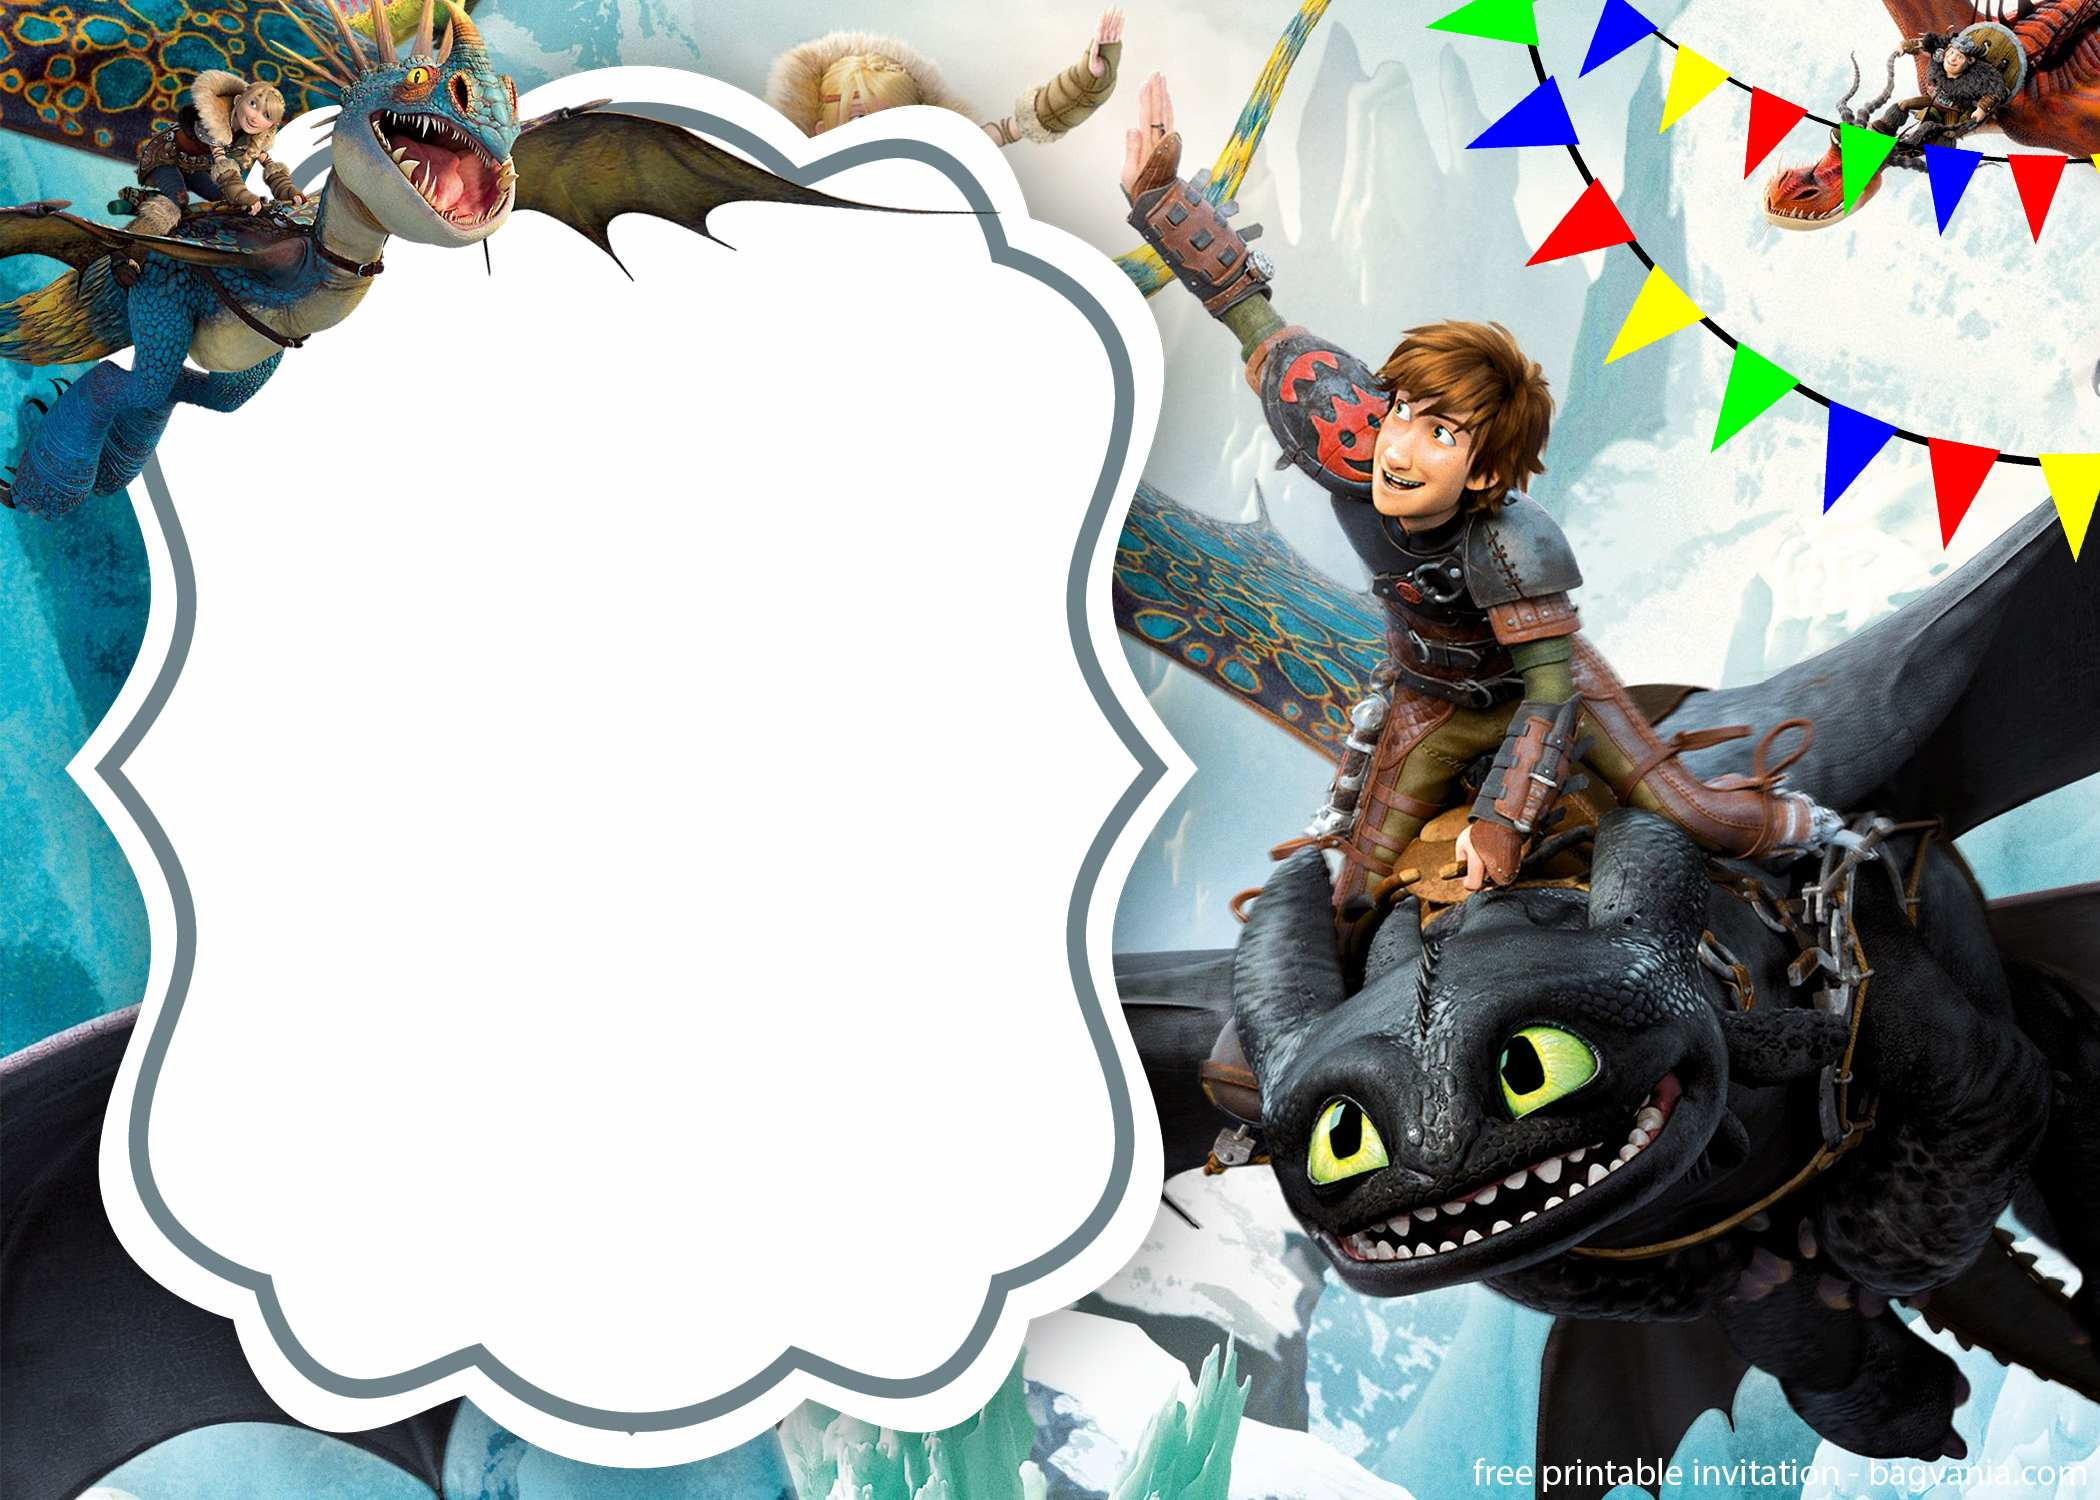 How To Train Your Dragon Birthday Invitations
 Free Download How To Train Your Dragon Invitation – FREE